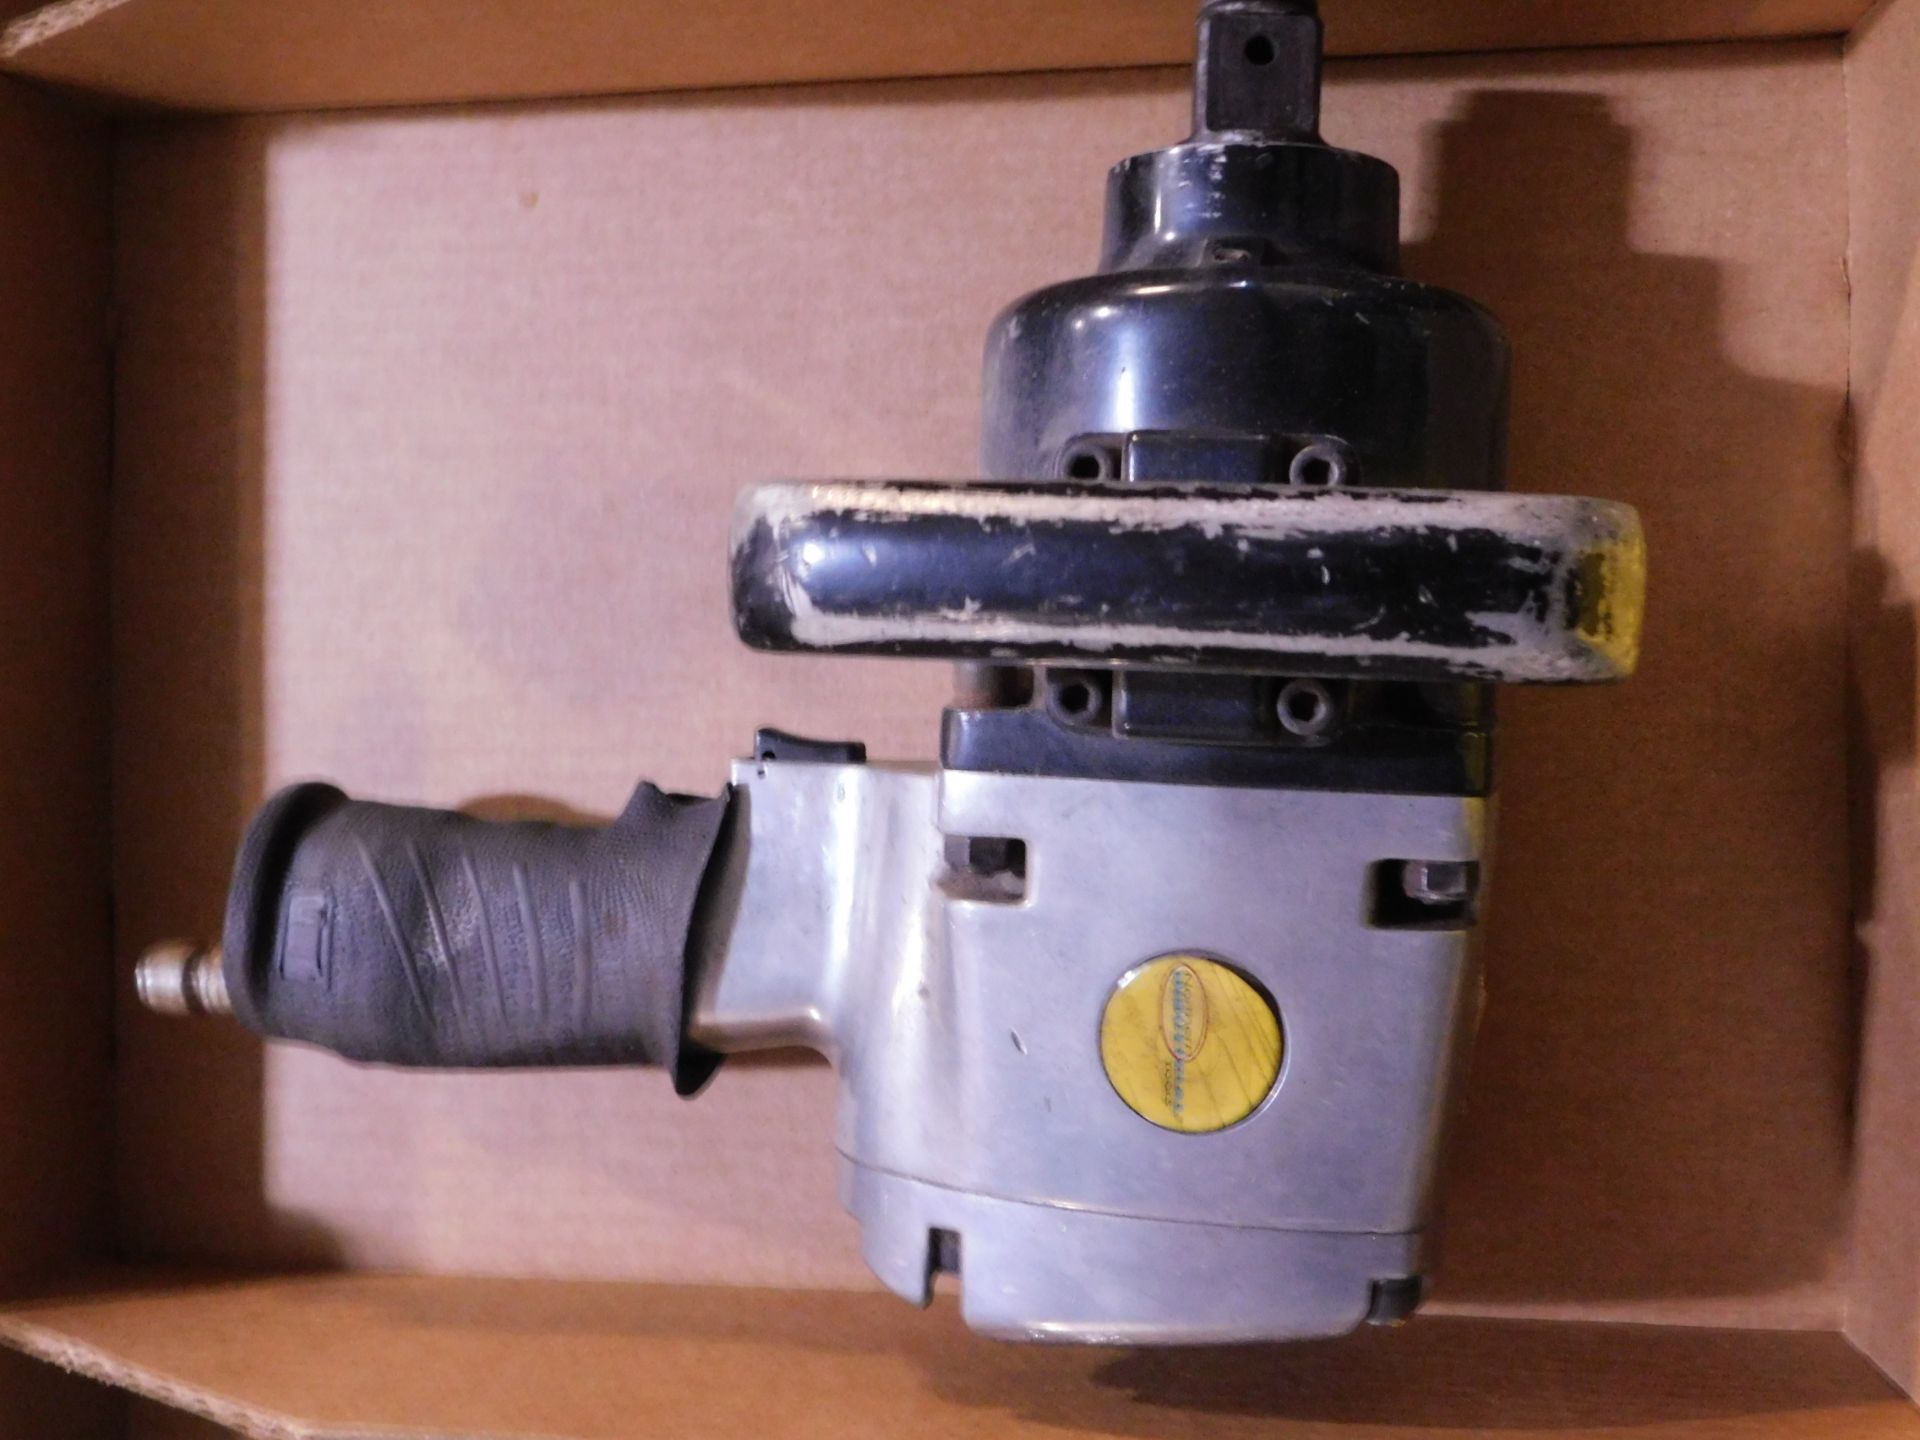 Northern Industrial Pneumatic Impact, 1" Driver